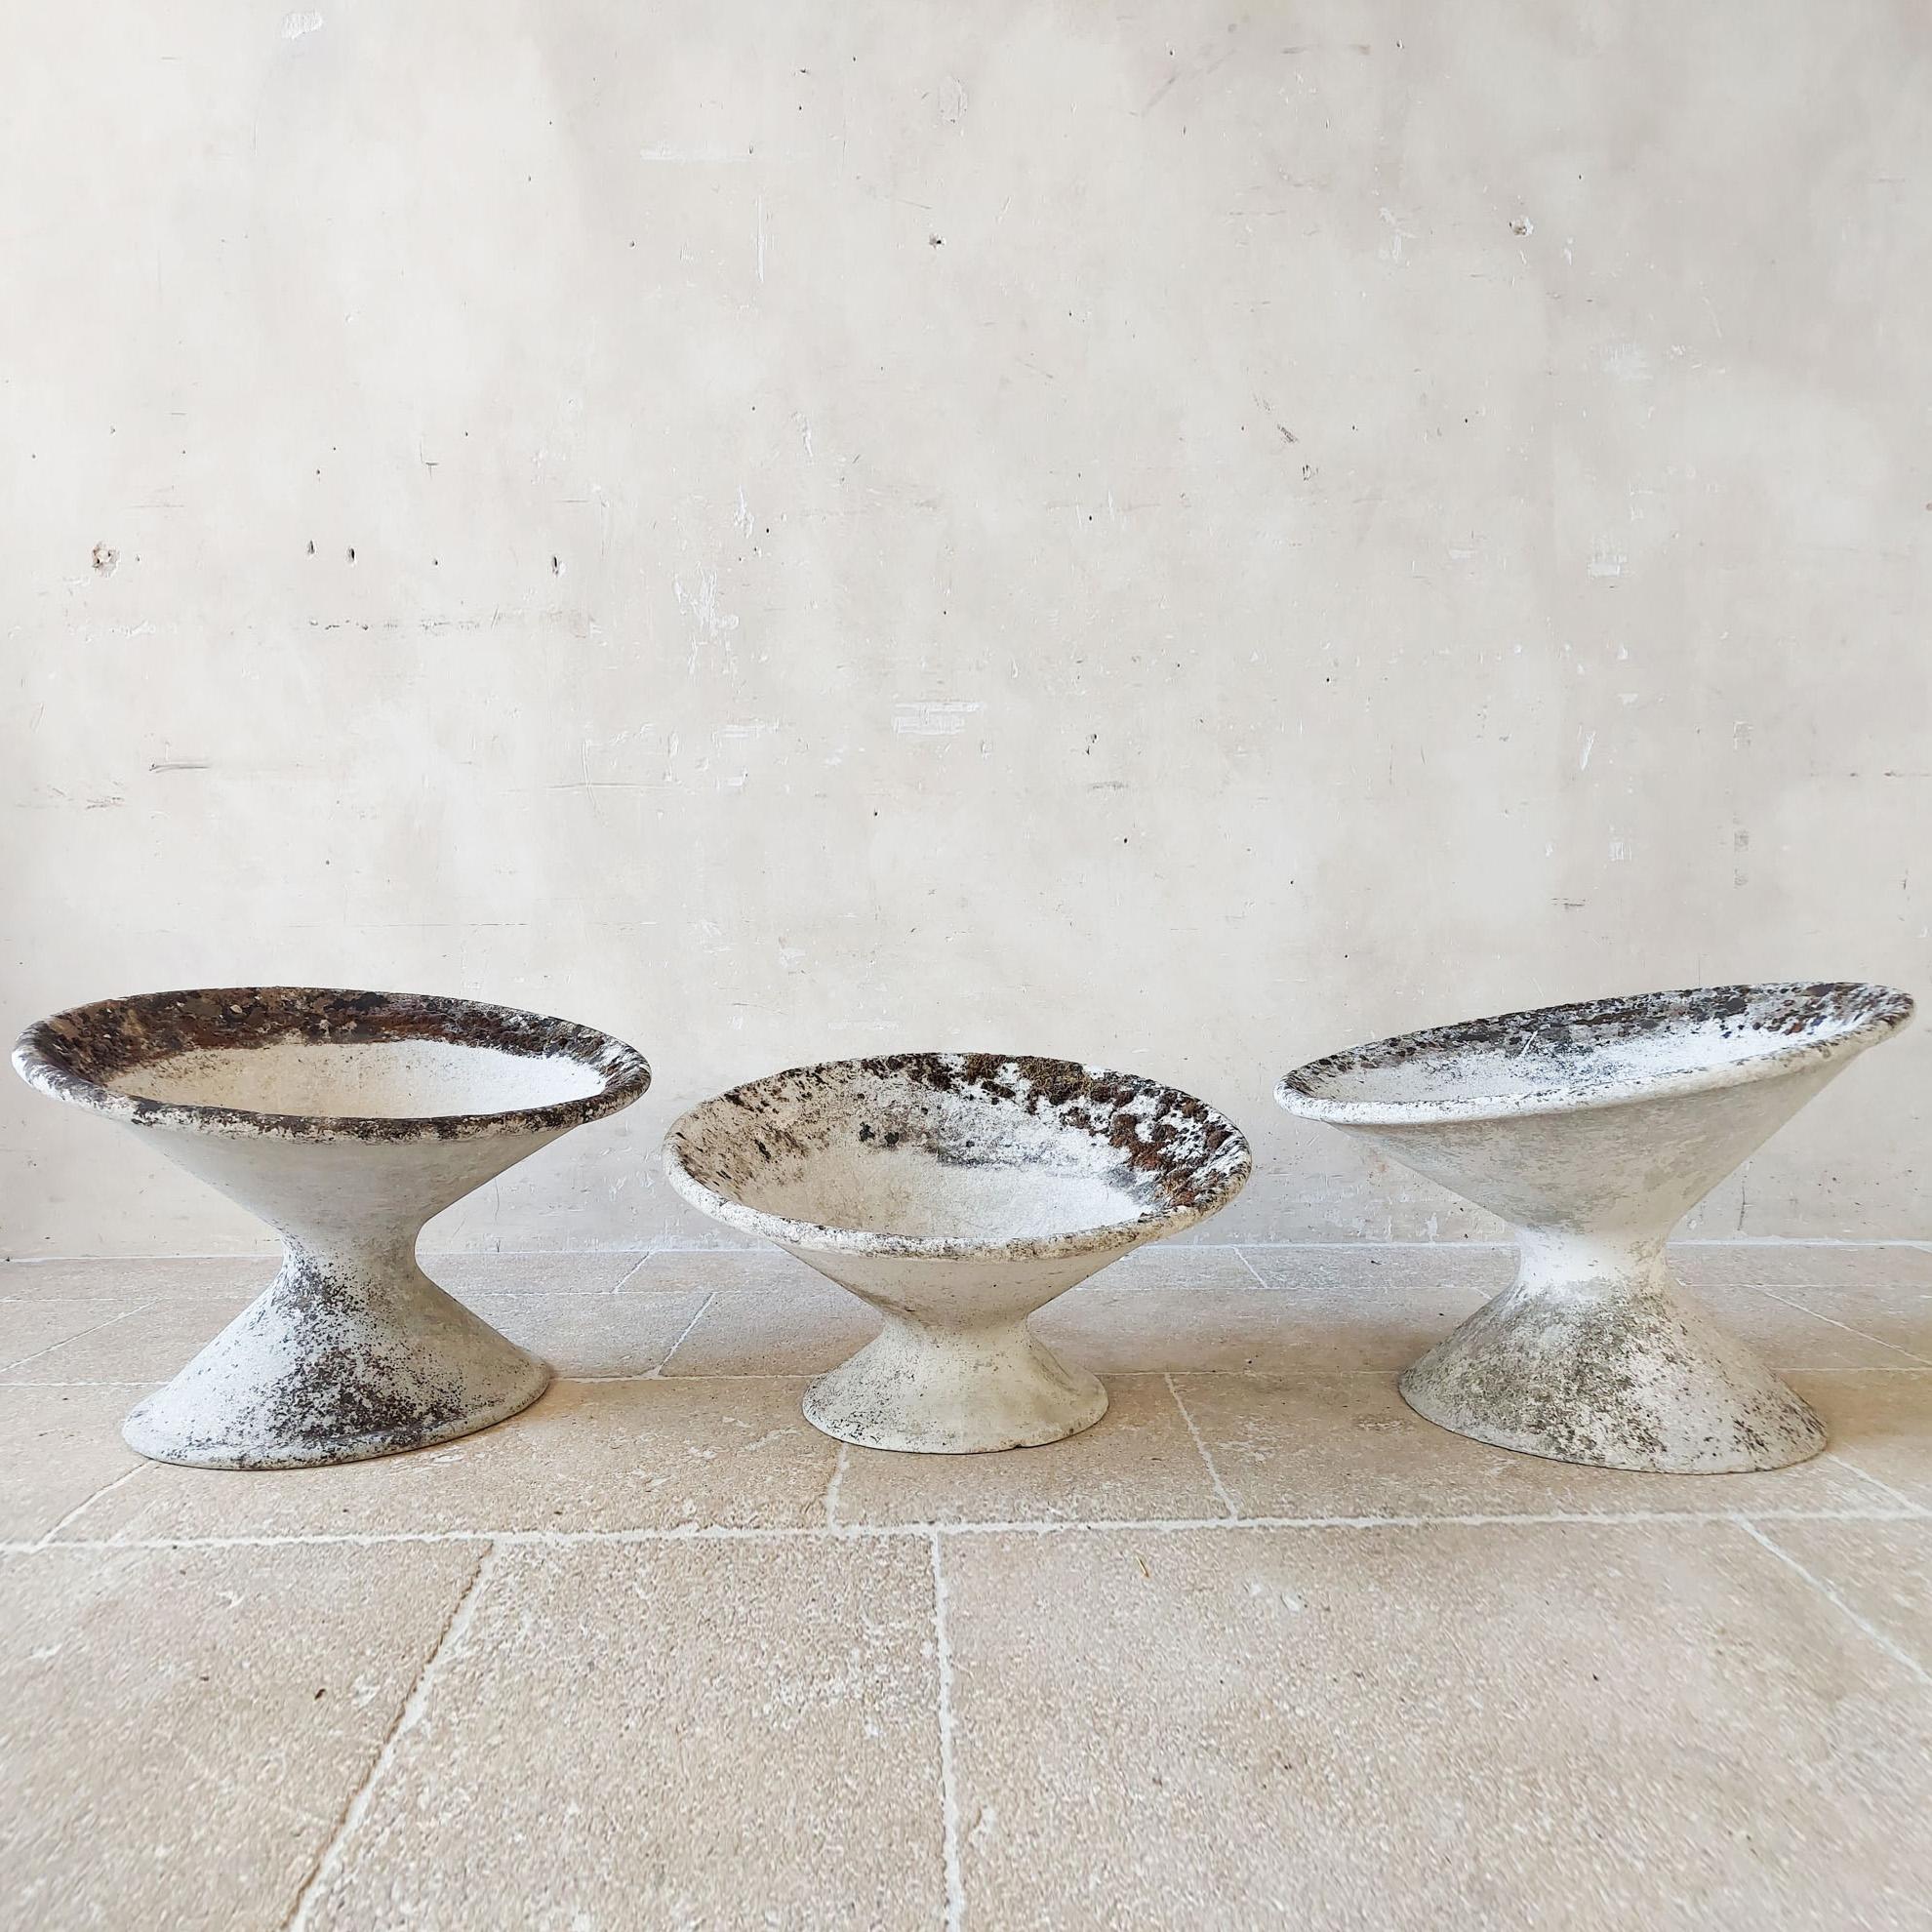 Price for the set of 3!
Set of three tilted concrete planters by the Swiss architect Willy Guhl. Manufactured by Eternit AG, who produced all of Guhl’s designs. Made from fiber cement, the planters are lightweight and durable in all climates. These